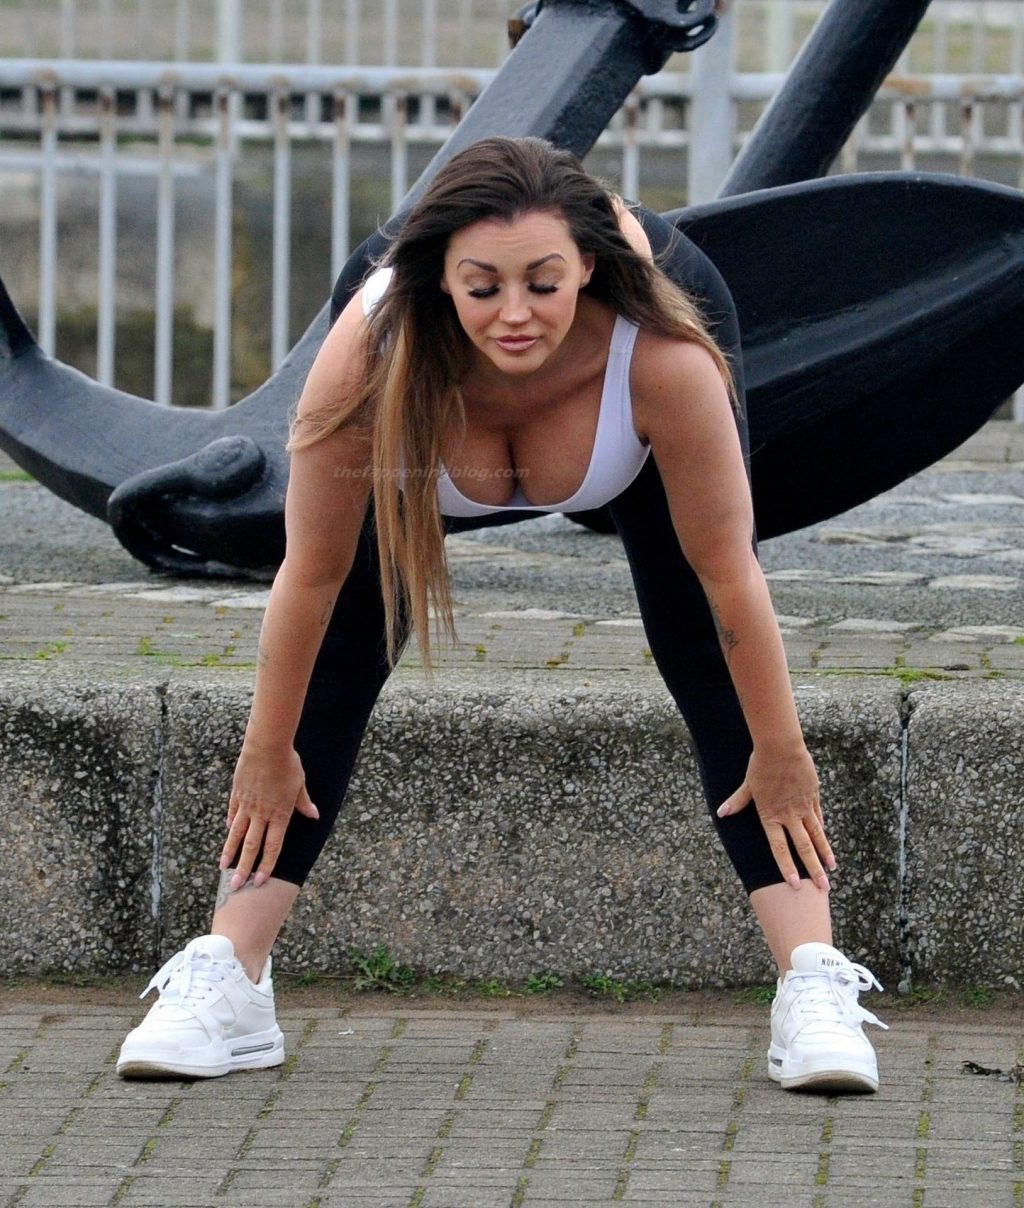 Holly Henderson Puts on Busty Display Out for a Jog in Liverpool (19 Photos)